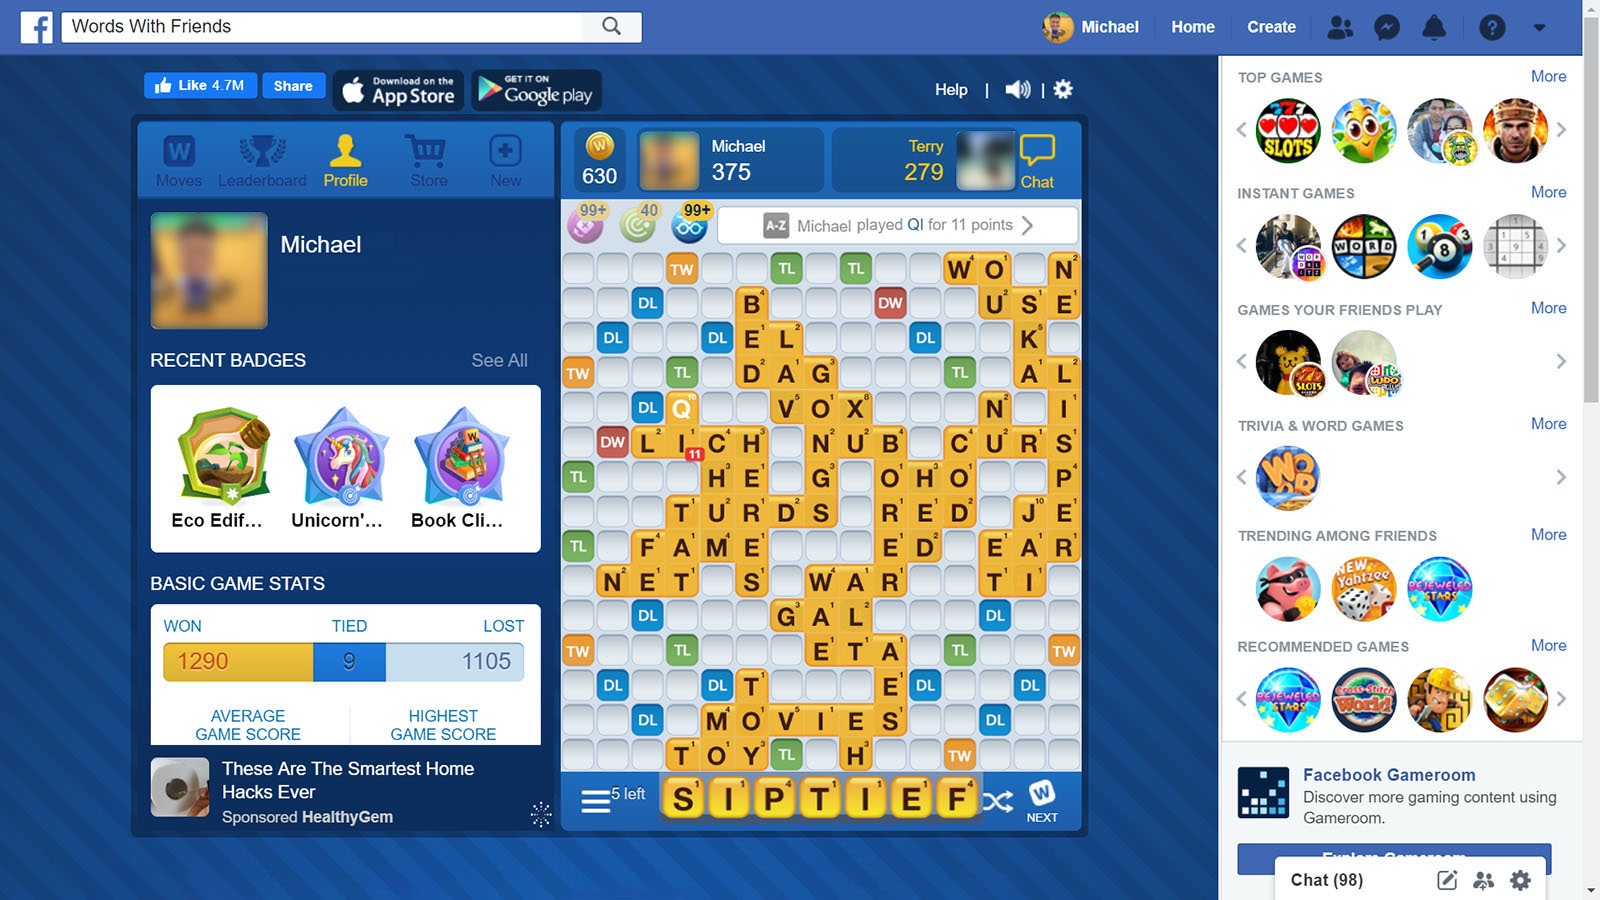 10 Fun Word Games to Play Online